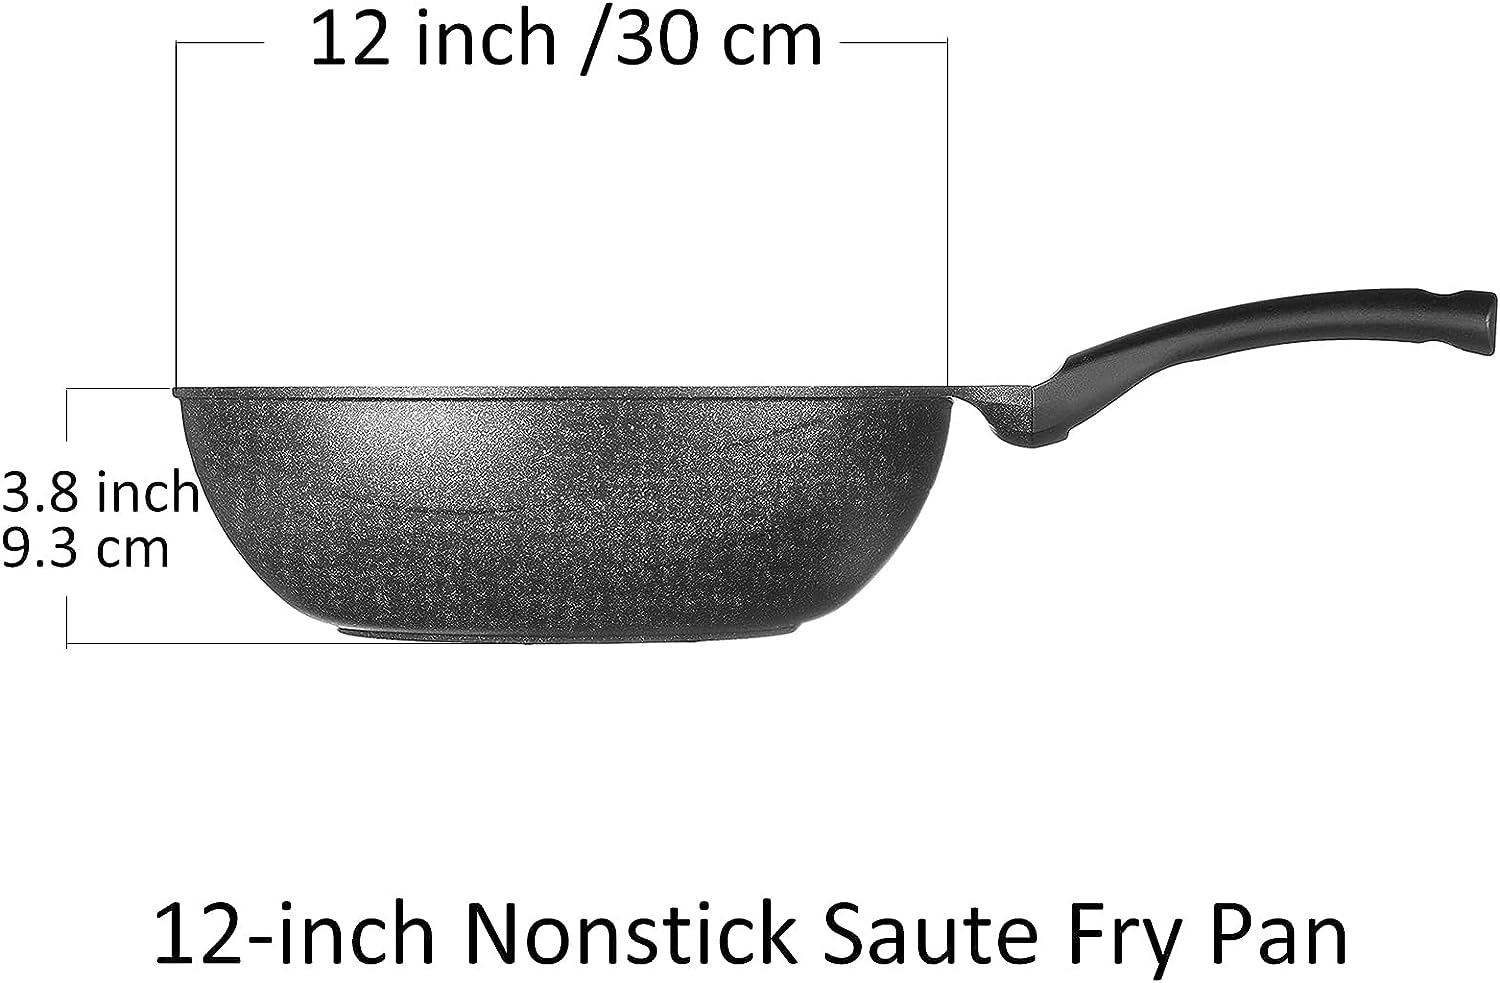 Cook N Home Marble Nonstick Saute Stir Fry Wok Pan 12-inch without Lid